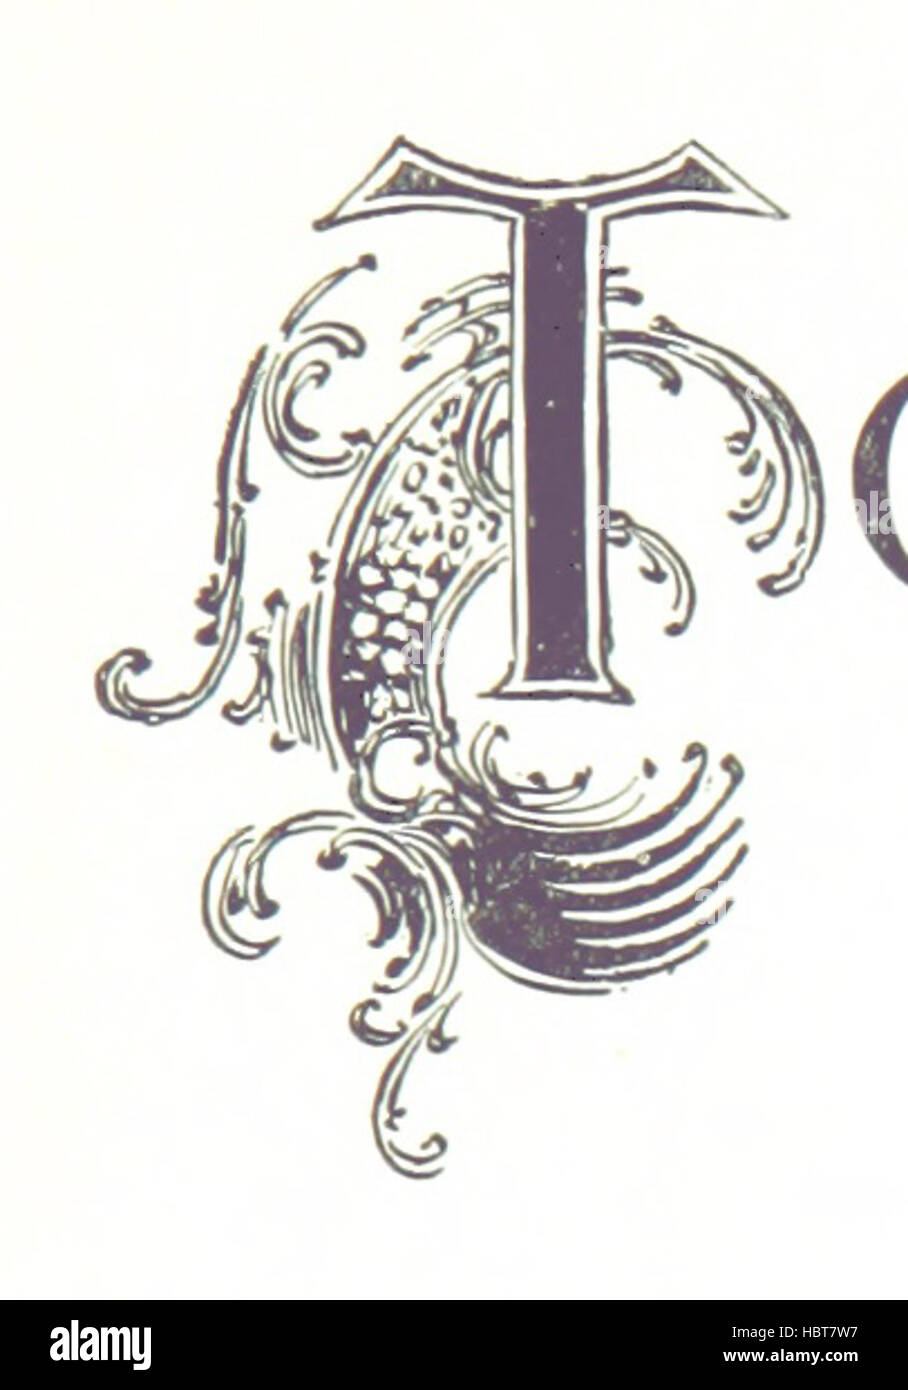 Image taken from page 7 of 'Toronto, historical, descriptive, and pictorial, etc' Image taken from page 7 of 'Toronto, historical, descriptive, and Stock Photo